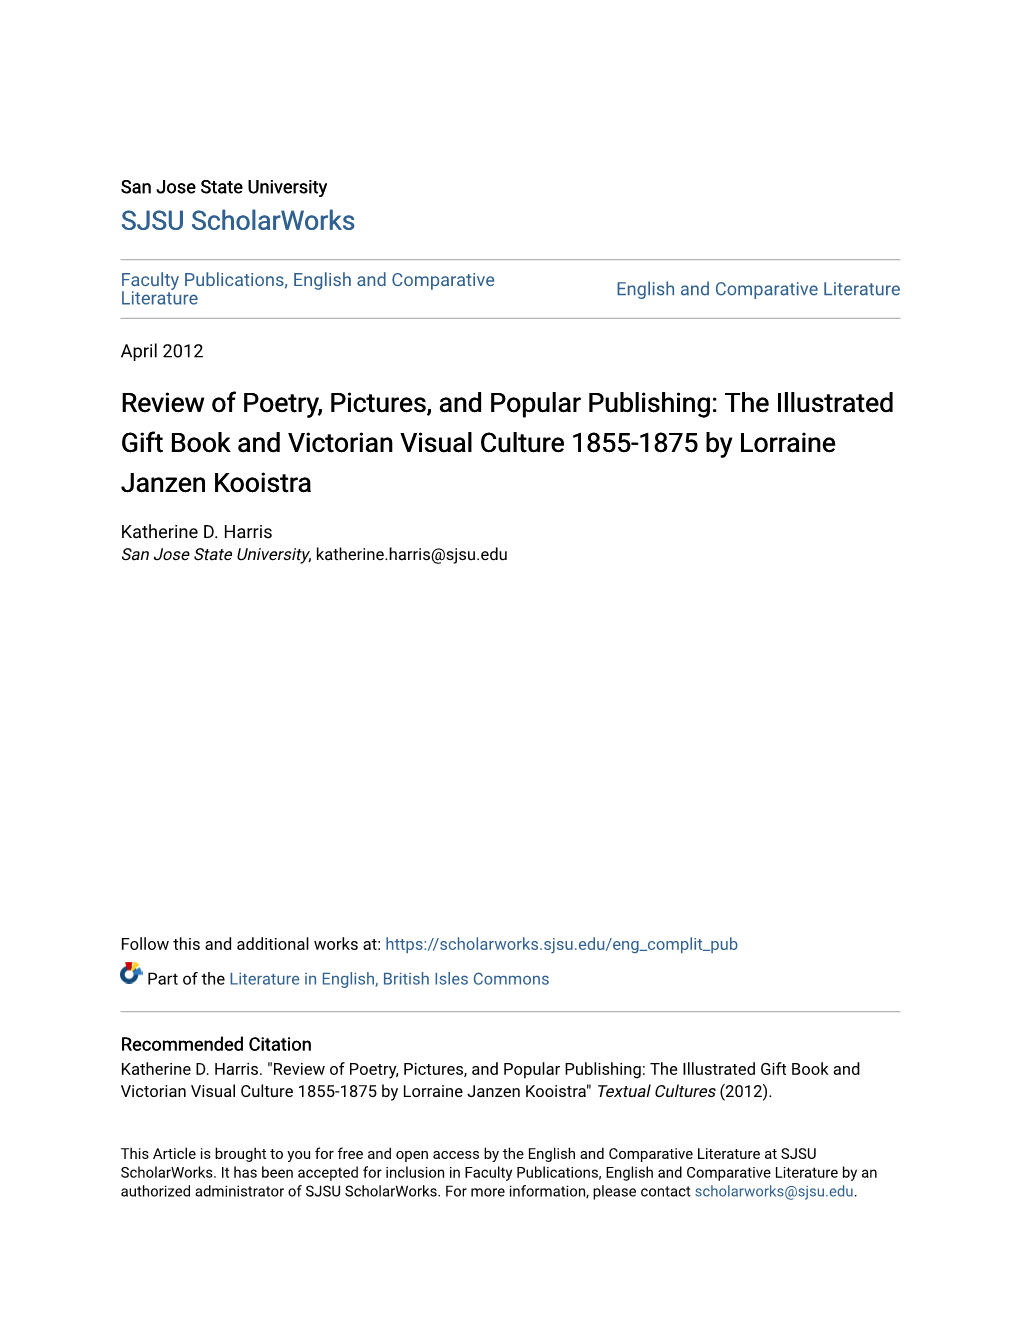 Review of Poetry, Pictures, and Popular Publishing: the Illustrated Gift Book and Victorian Visual Culture 1855-1875 by Lorraine Janzen Kooistra